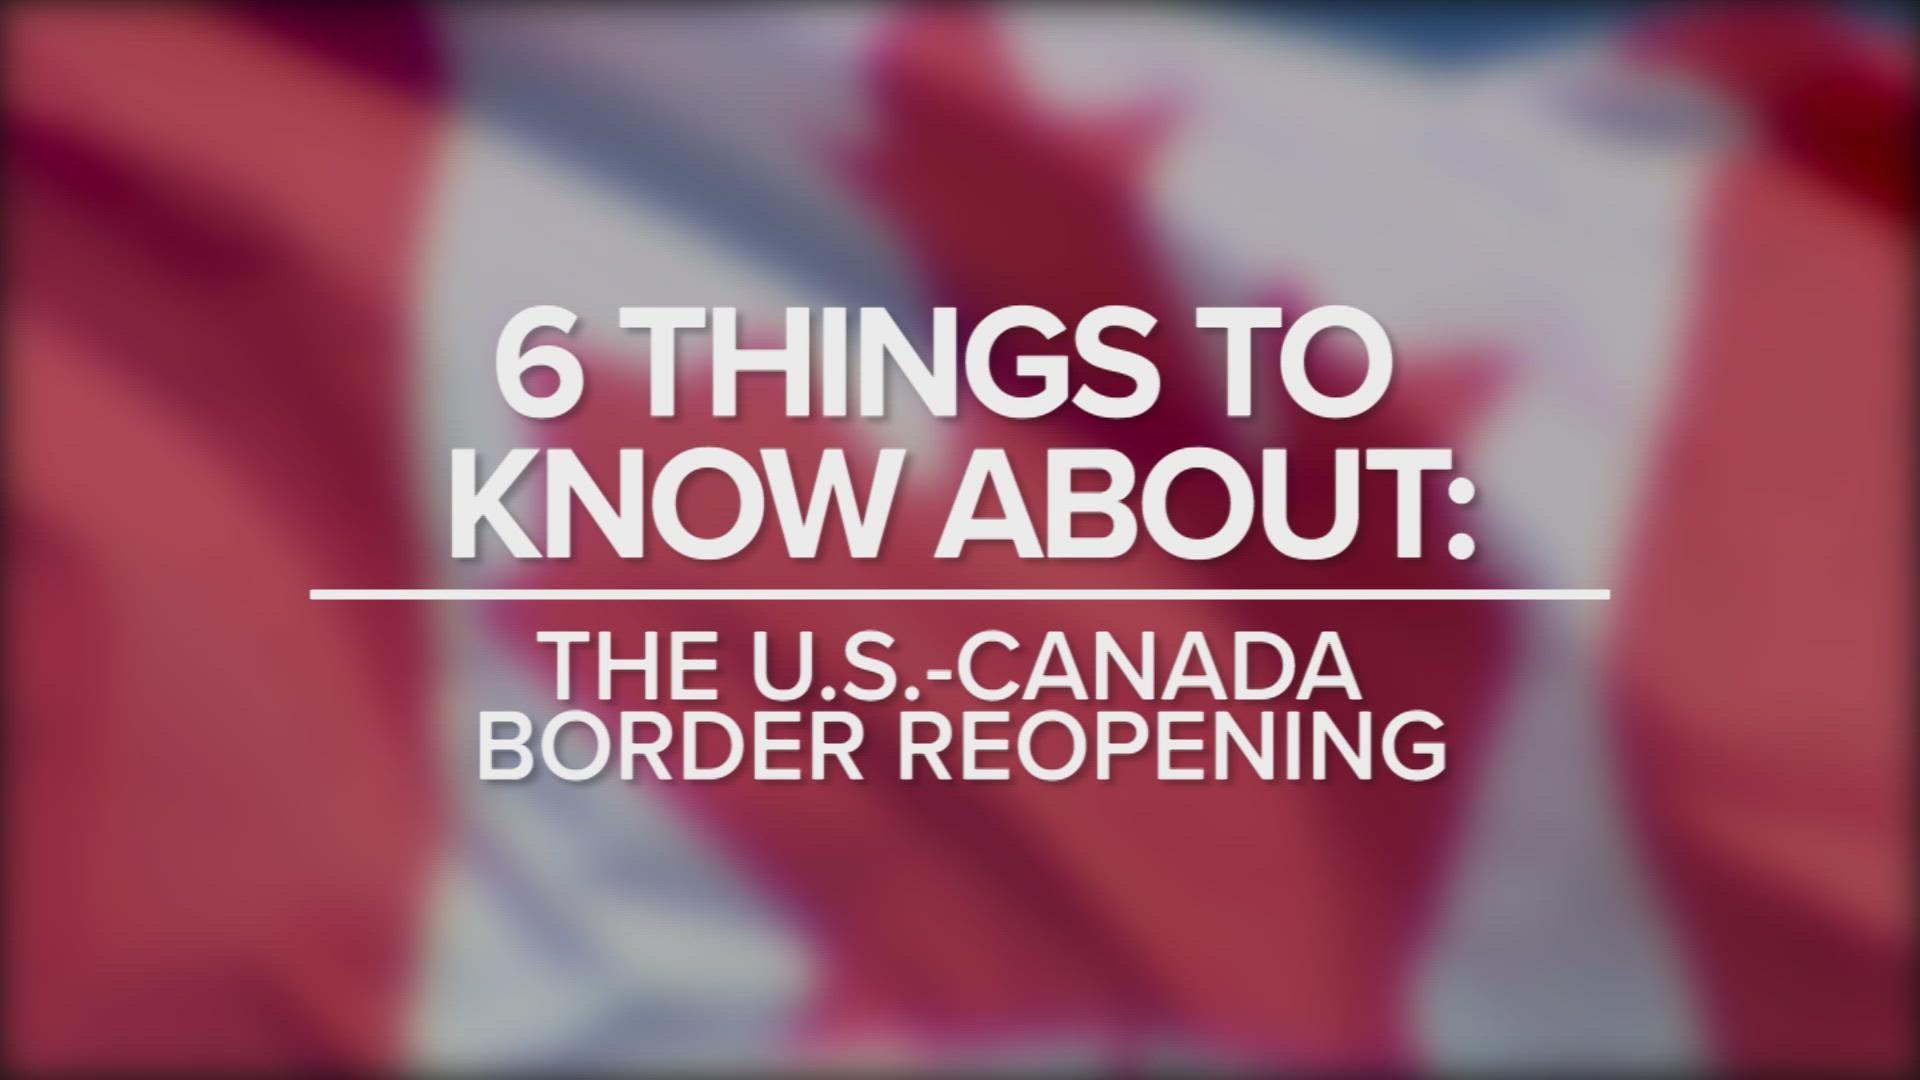 With the U.S.-Canada border reopening on a limited basis soon, here are the answers to some questions travelers may have